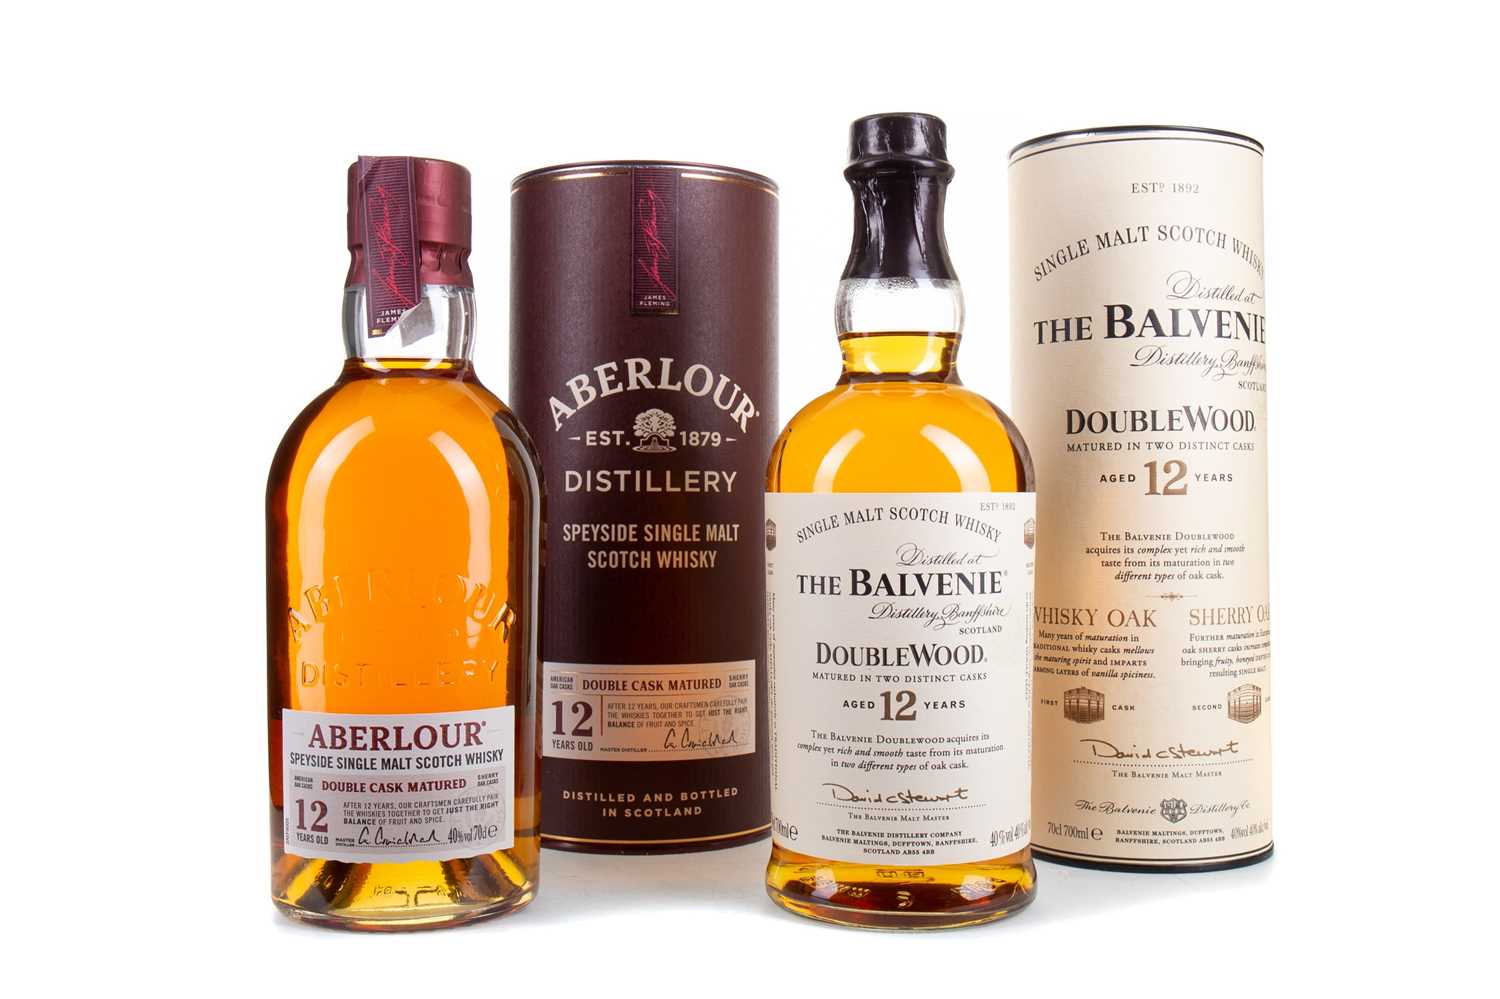 Lot 45 - ABERLOUR 12 YEAR OLD AND BALVENIE 12 YEAR OLD DOUBLEWOOD